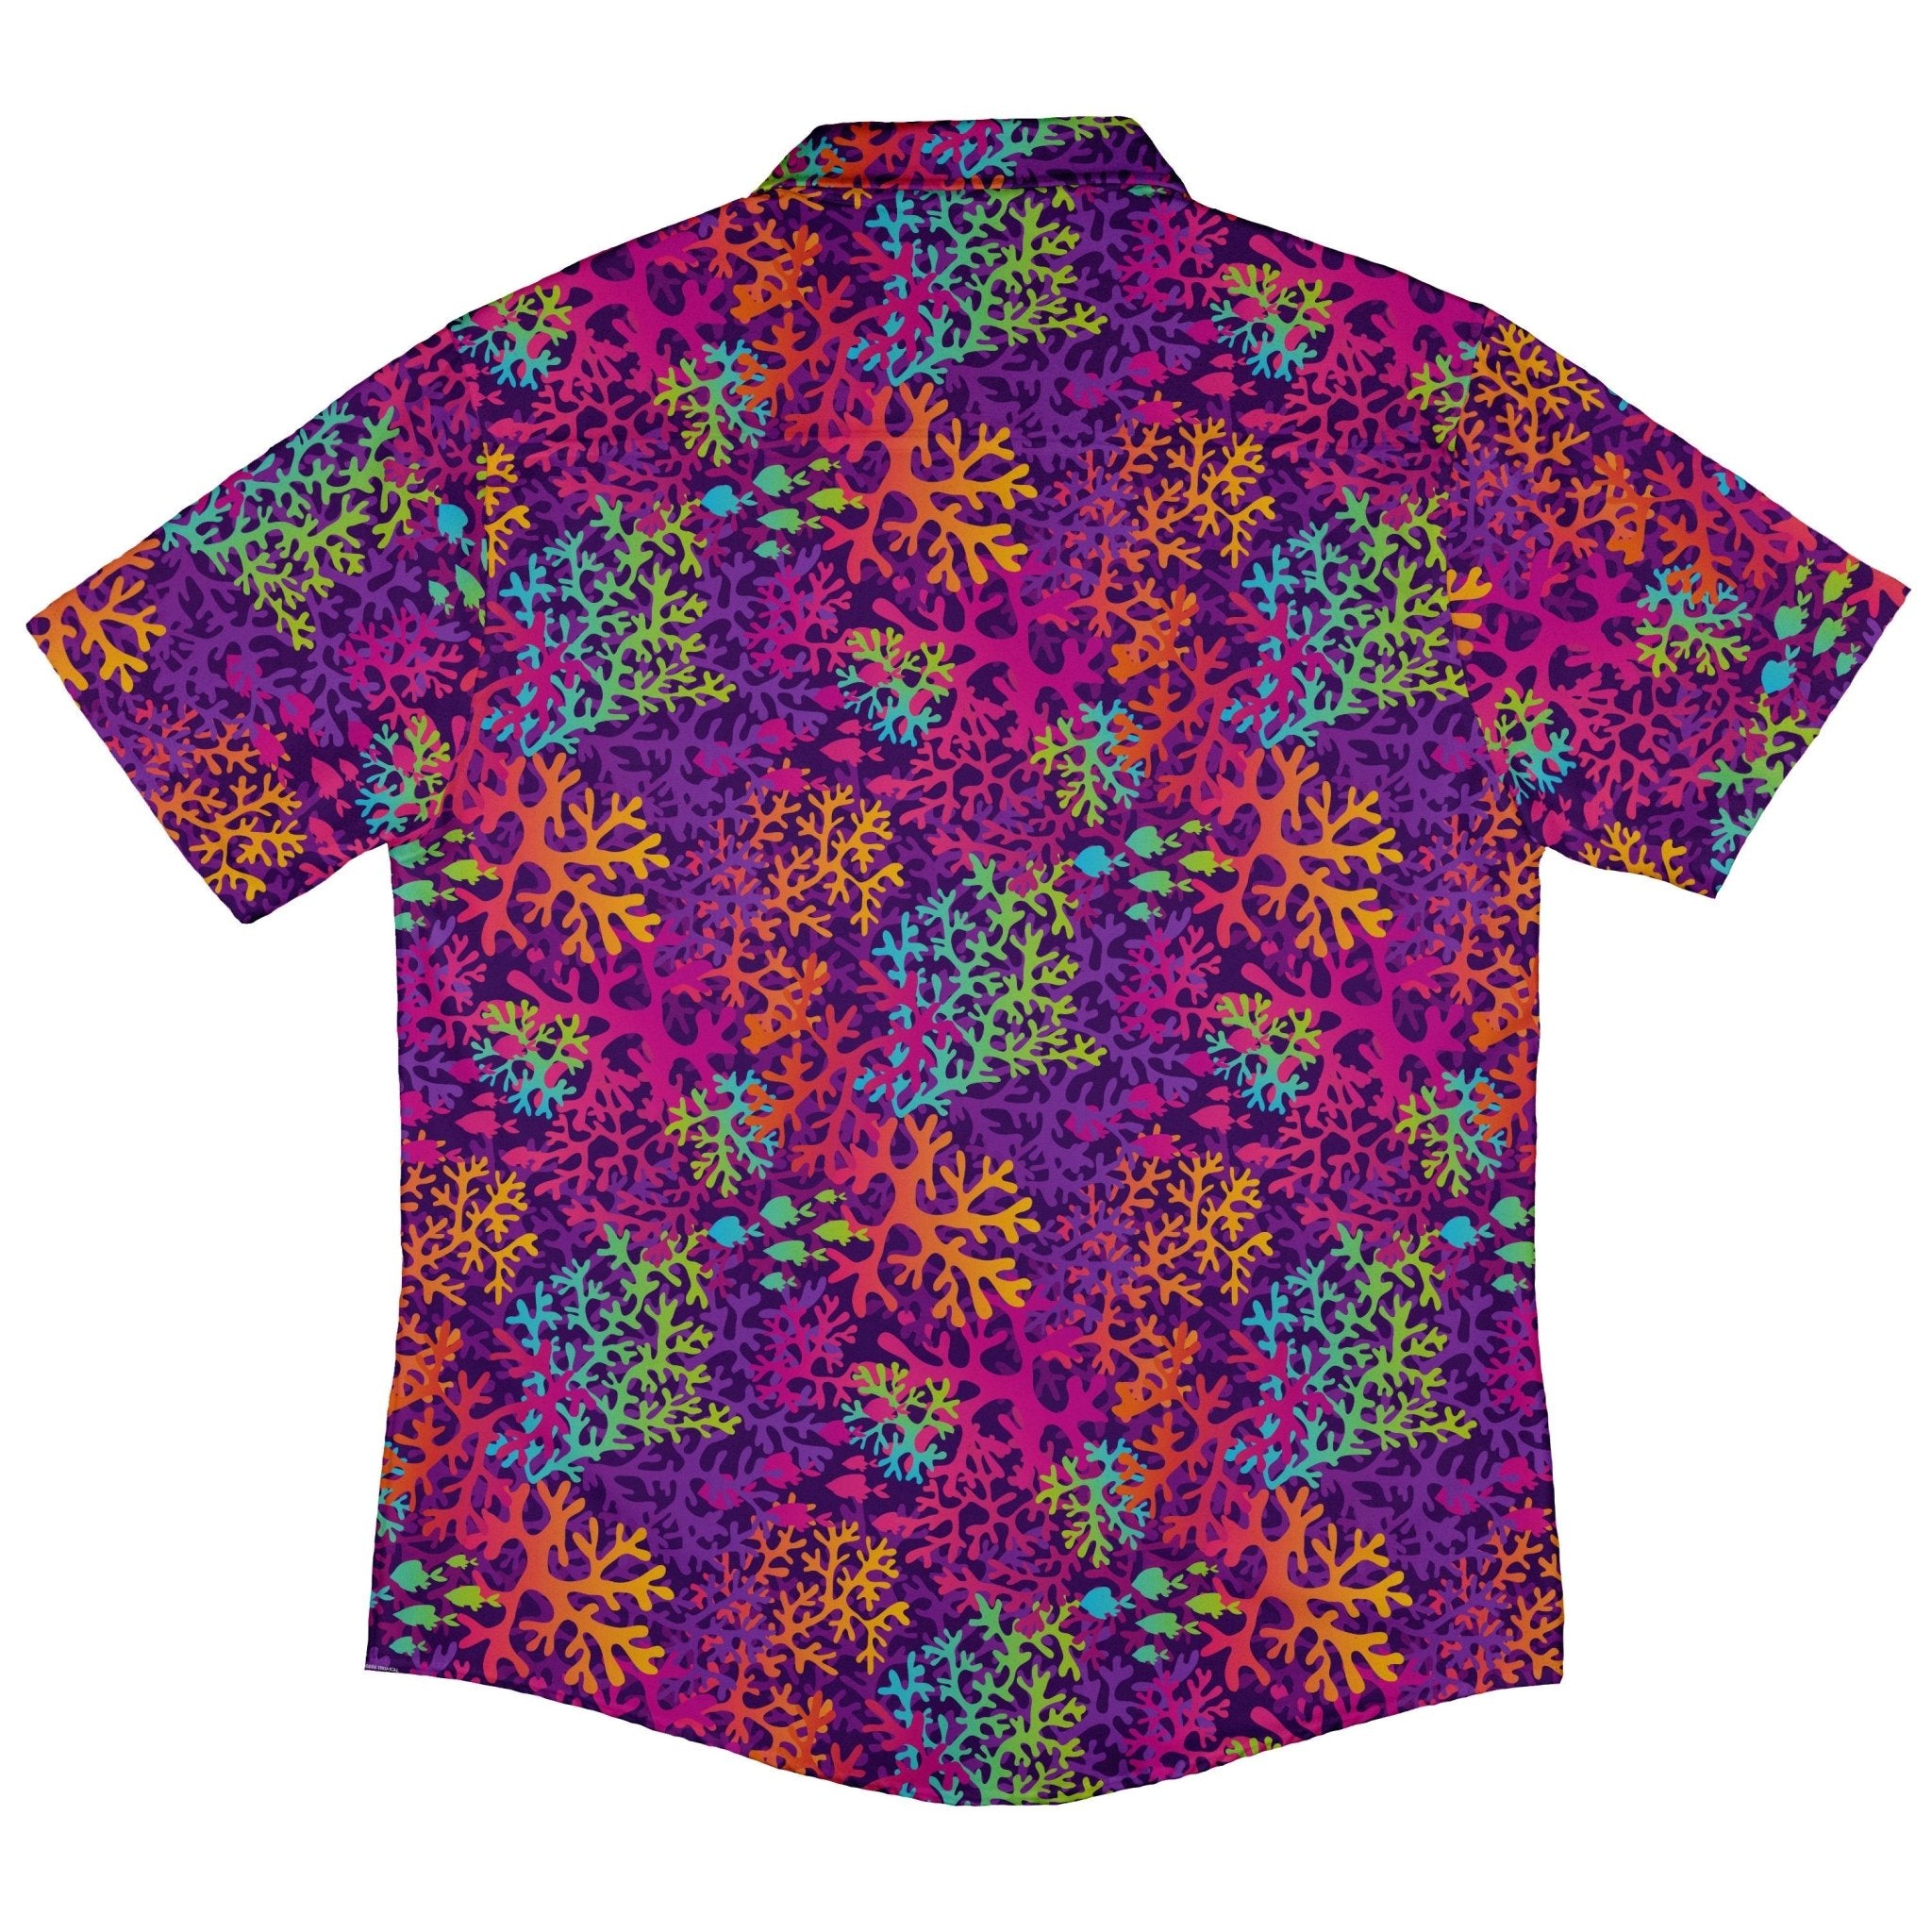 Science Marine Biology Rainbow Coral Button Up Shirt - adult sizing - Maximalist Patterns - science print